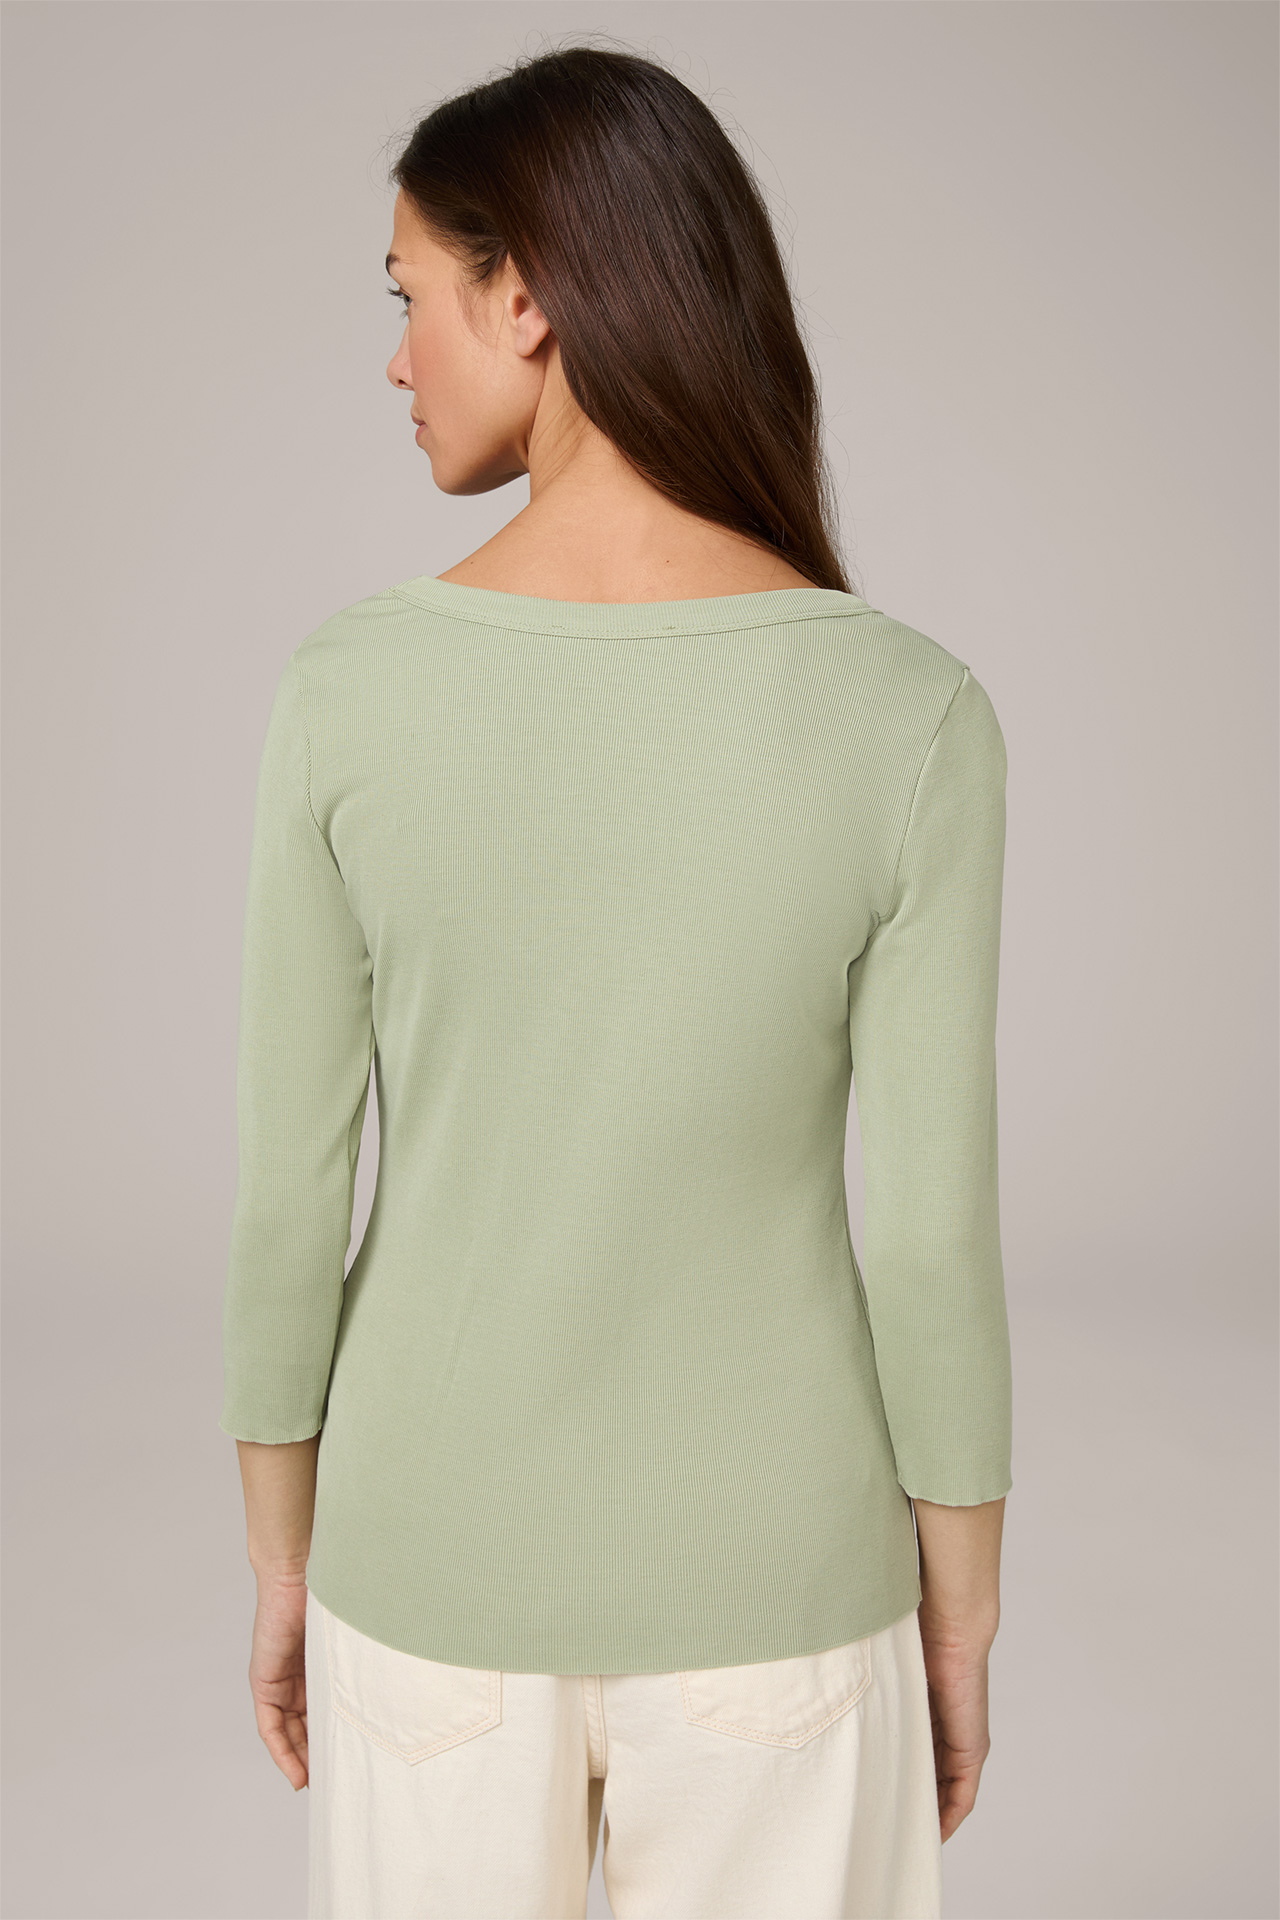 Tencel Cotton Ribbed Long-Sleeved Top in Sage